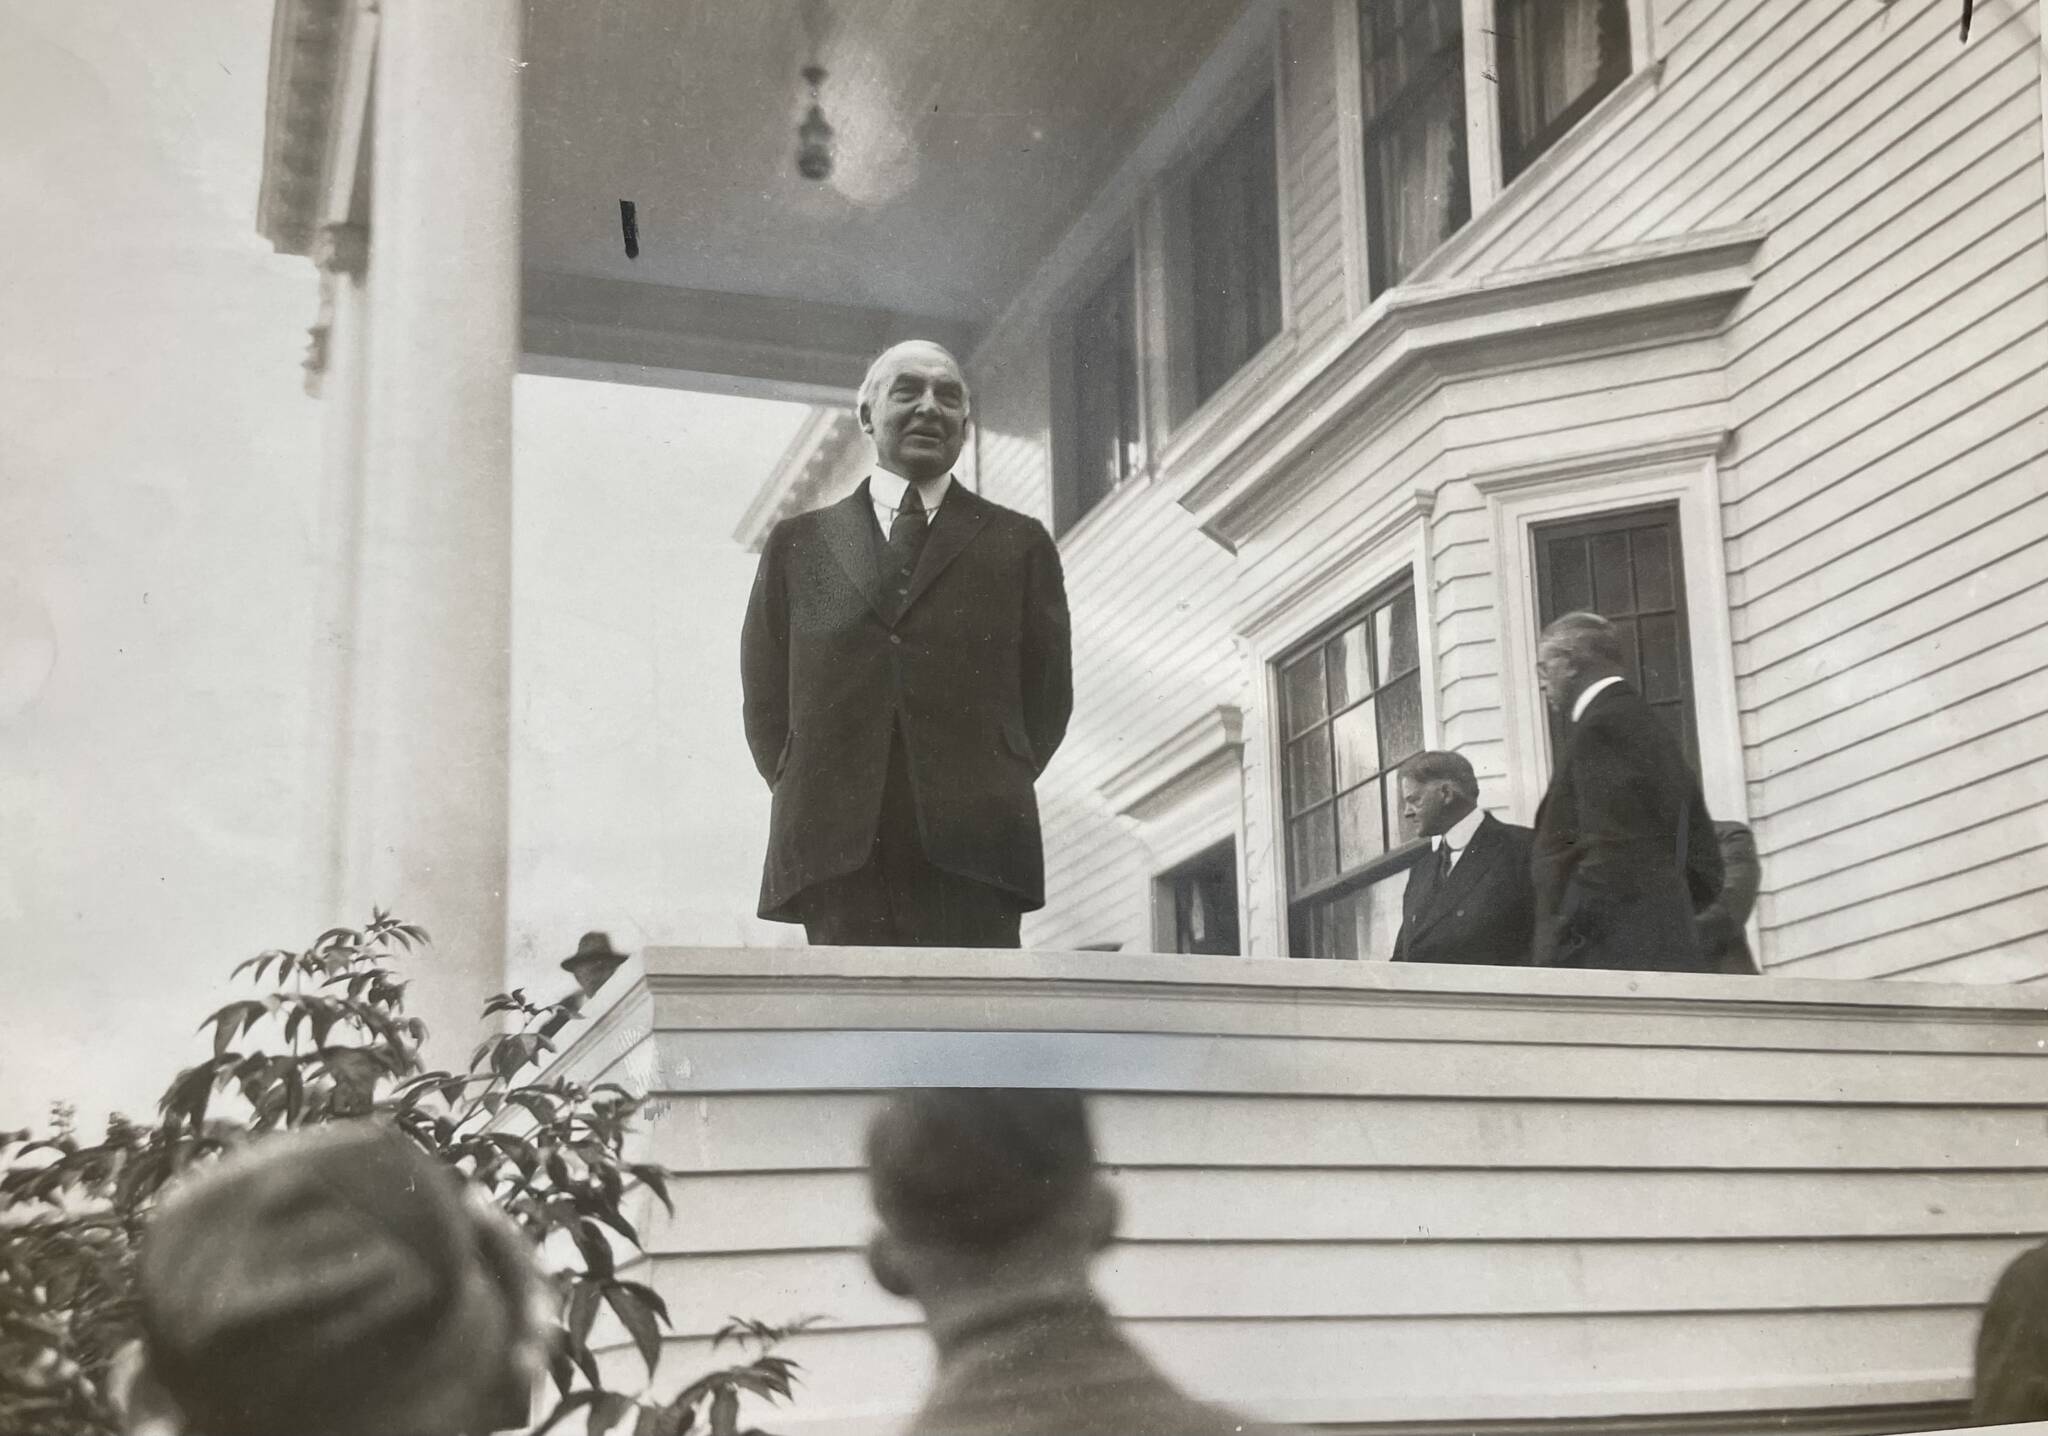 President Warren G. Harding speaks to a rain-drenched crowd from the porch of the Governor’s House on Calhoun Avenue on July 10, 1923. He was accompanied on his “Voyage of Understanding” by several cabinet members including Secretary of Commerce Herbert Hoover, whose profile is seen clearly in the background. Harding was the country’s 29th president. Hoover was elected the 31st. (Alaska State Library Historical Collection P418-2.)